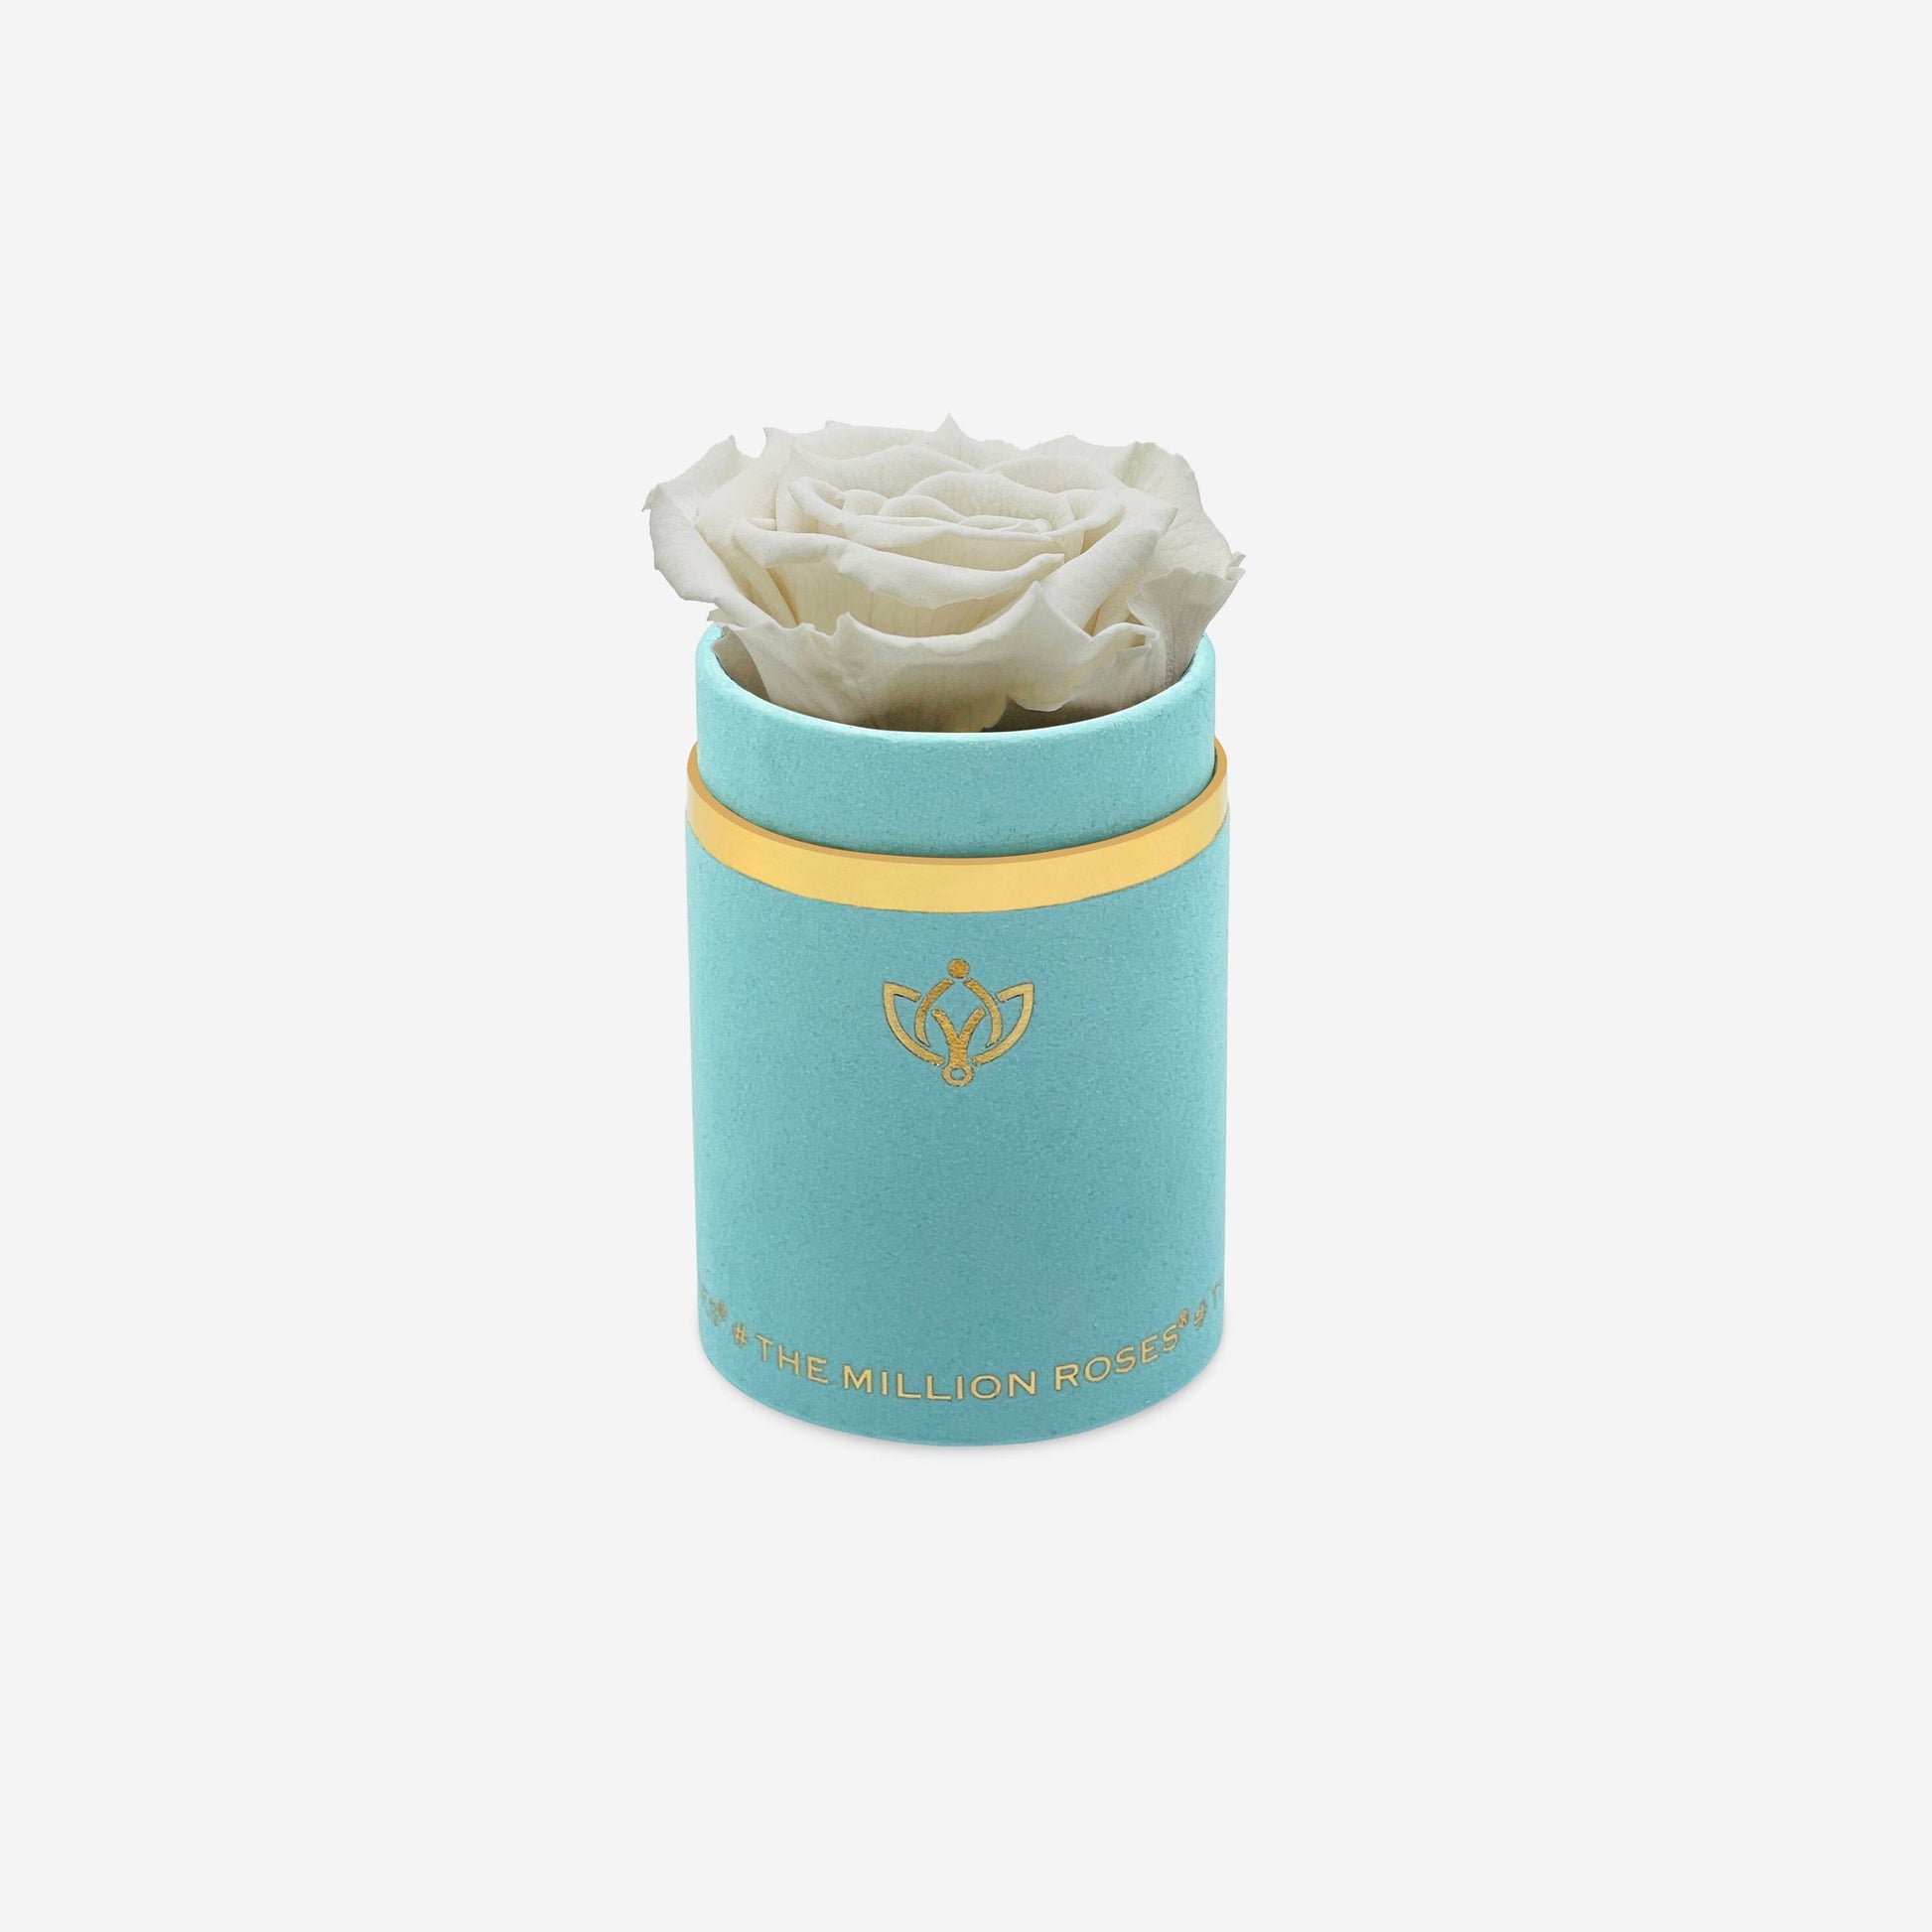 Single Mint Green Suede Box | Off White Rose - The Million Roses